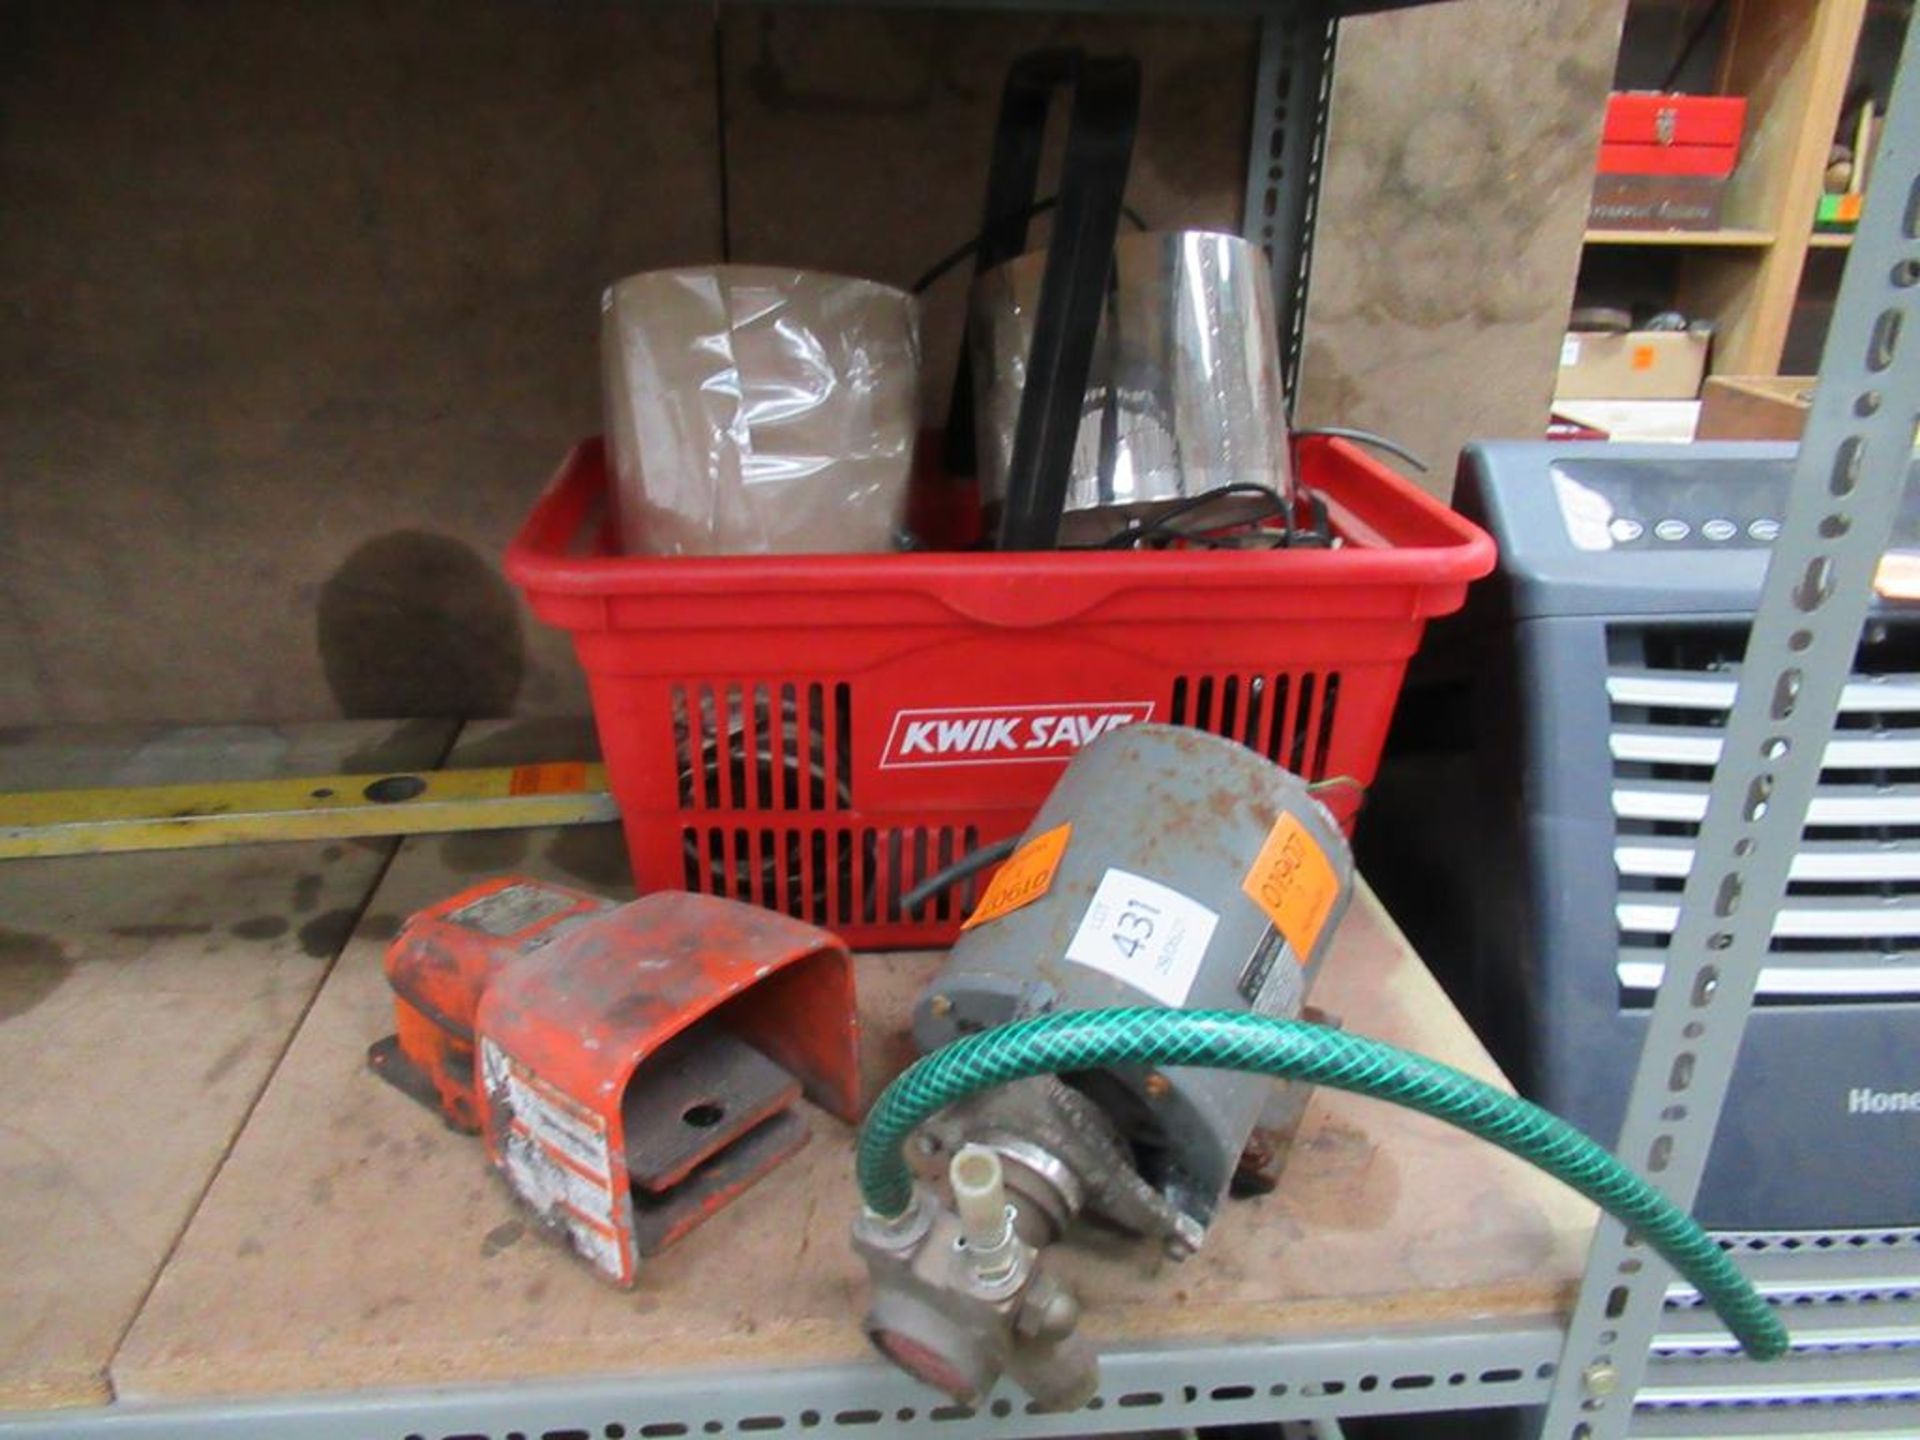 Procon Rotary Vane Pump, Hercules Foot Switch and Box to contain Various Cables